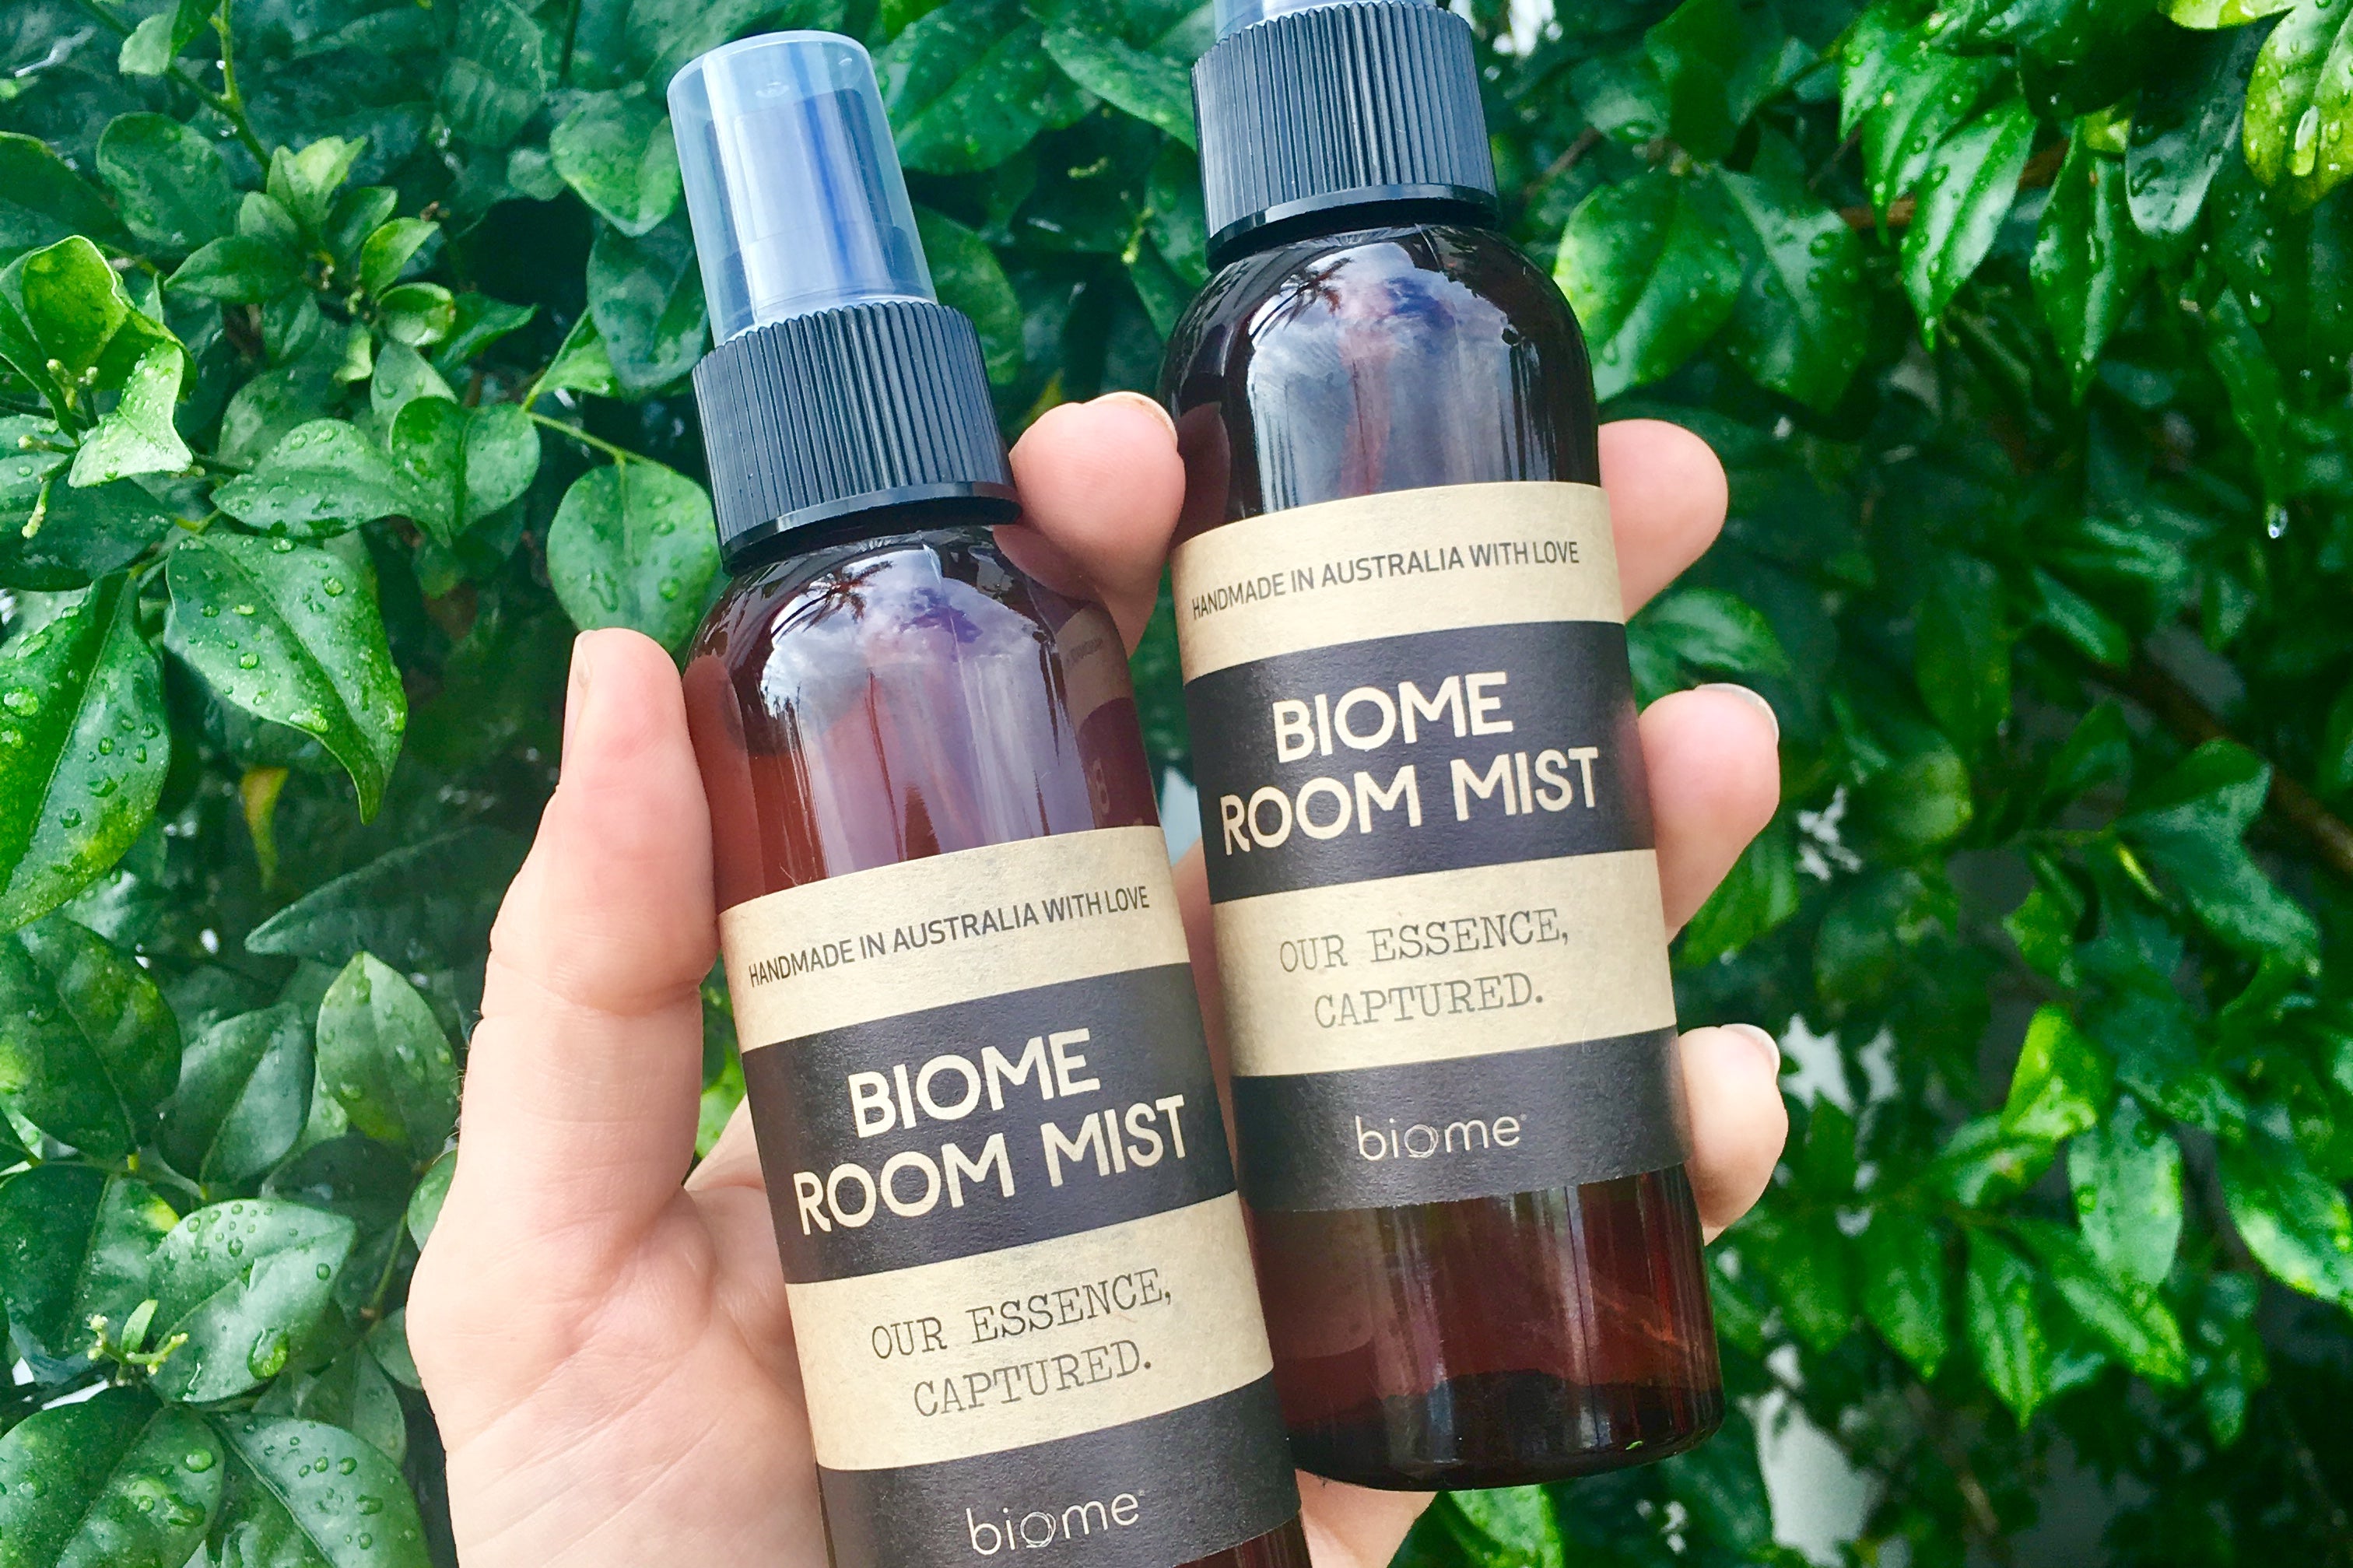 Biome Room Mist - Toxin Free Home Fragrance